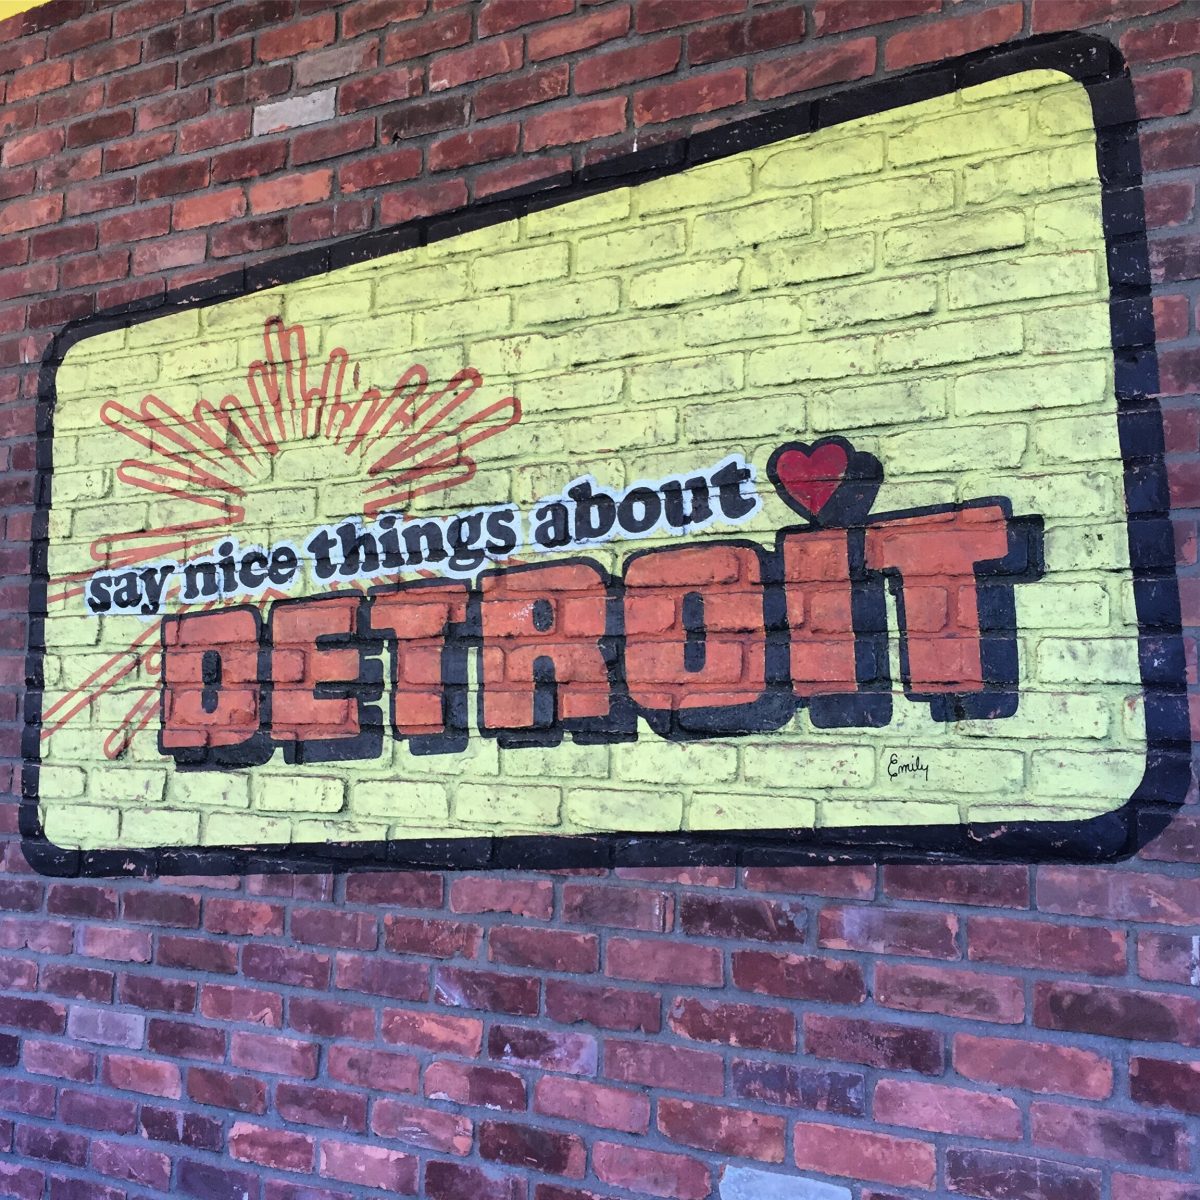 Move to Detroit